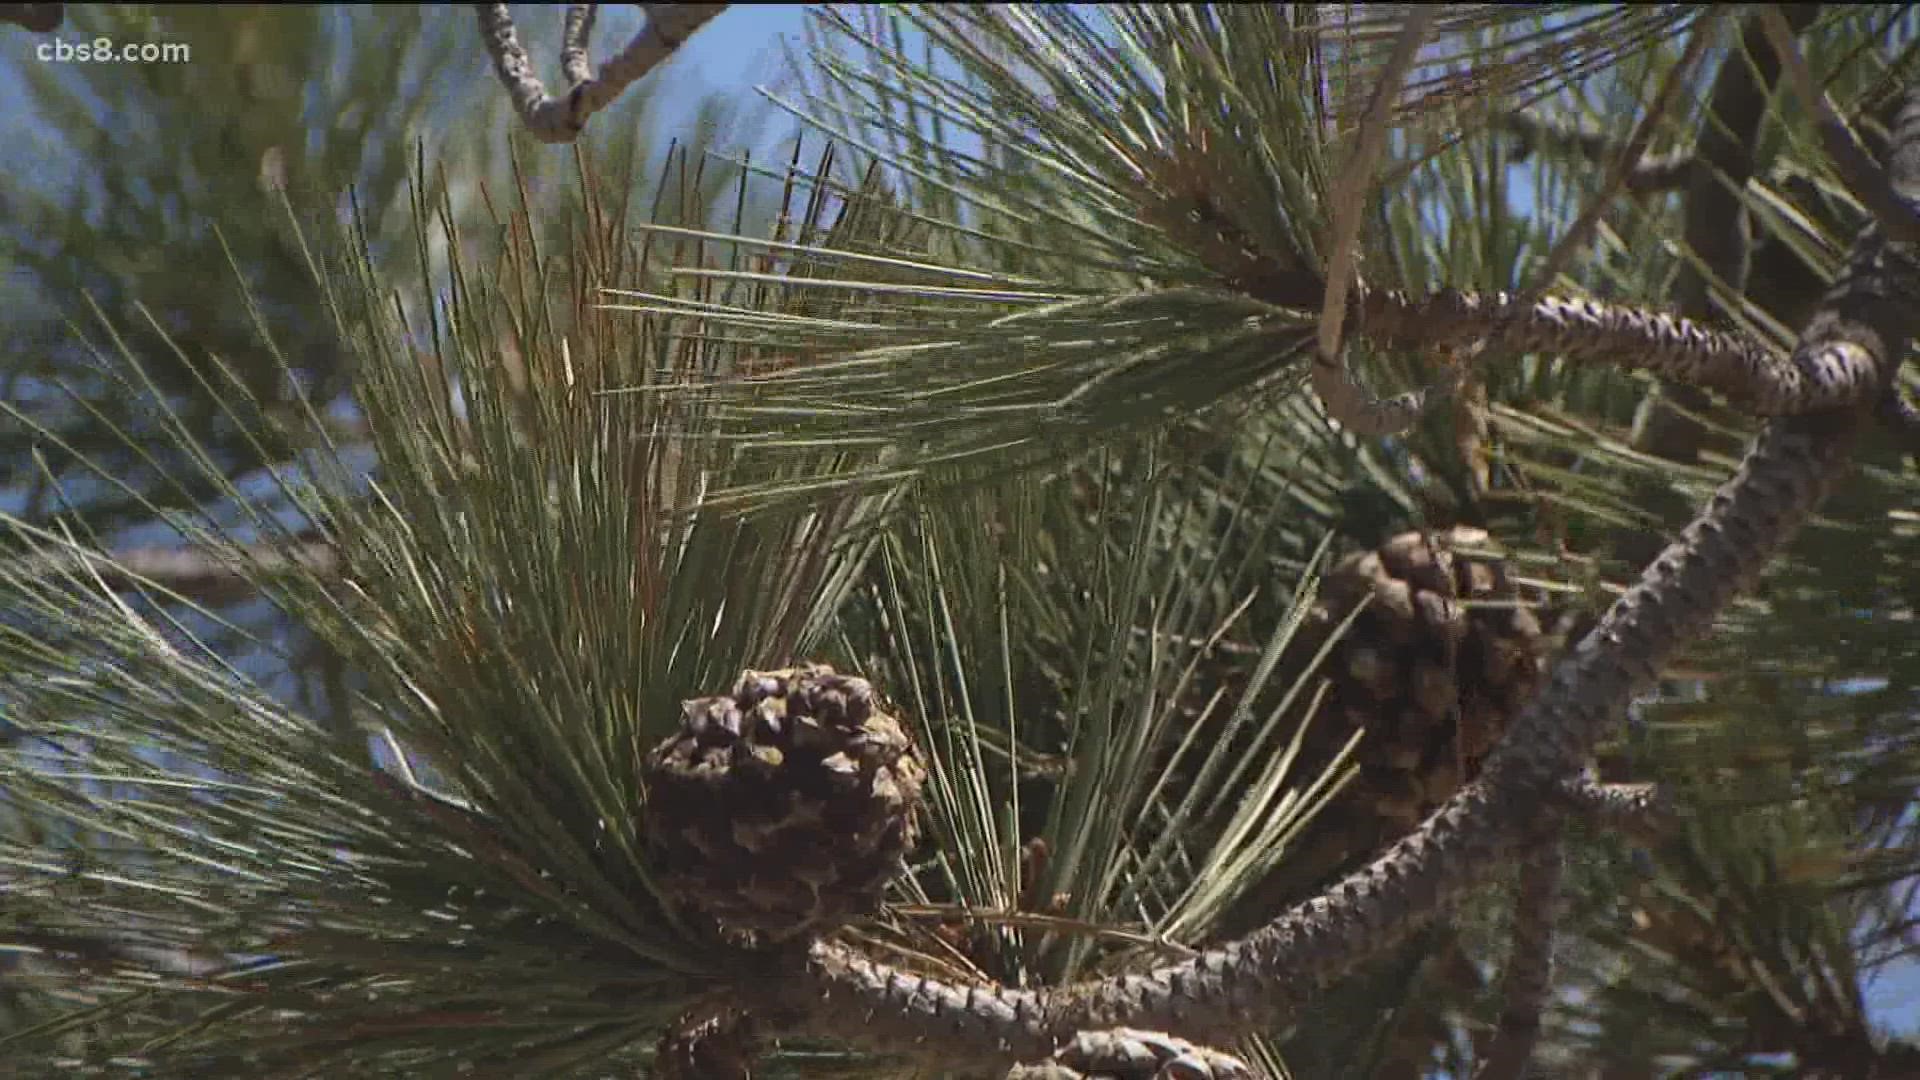 Emily Tianshi has been researching the pine for years and now stars in a short documentary.